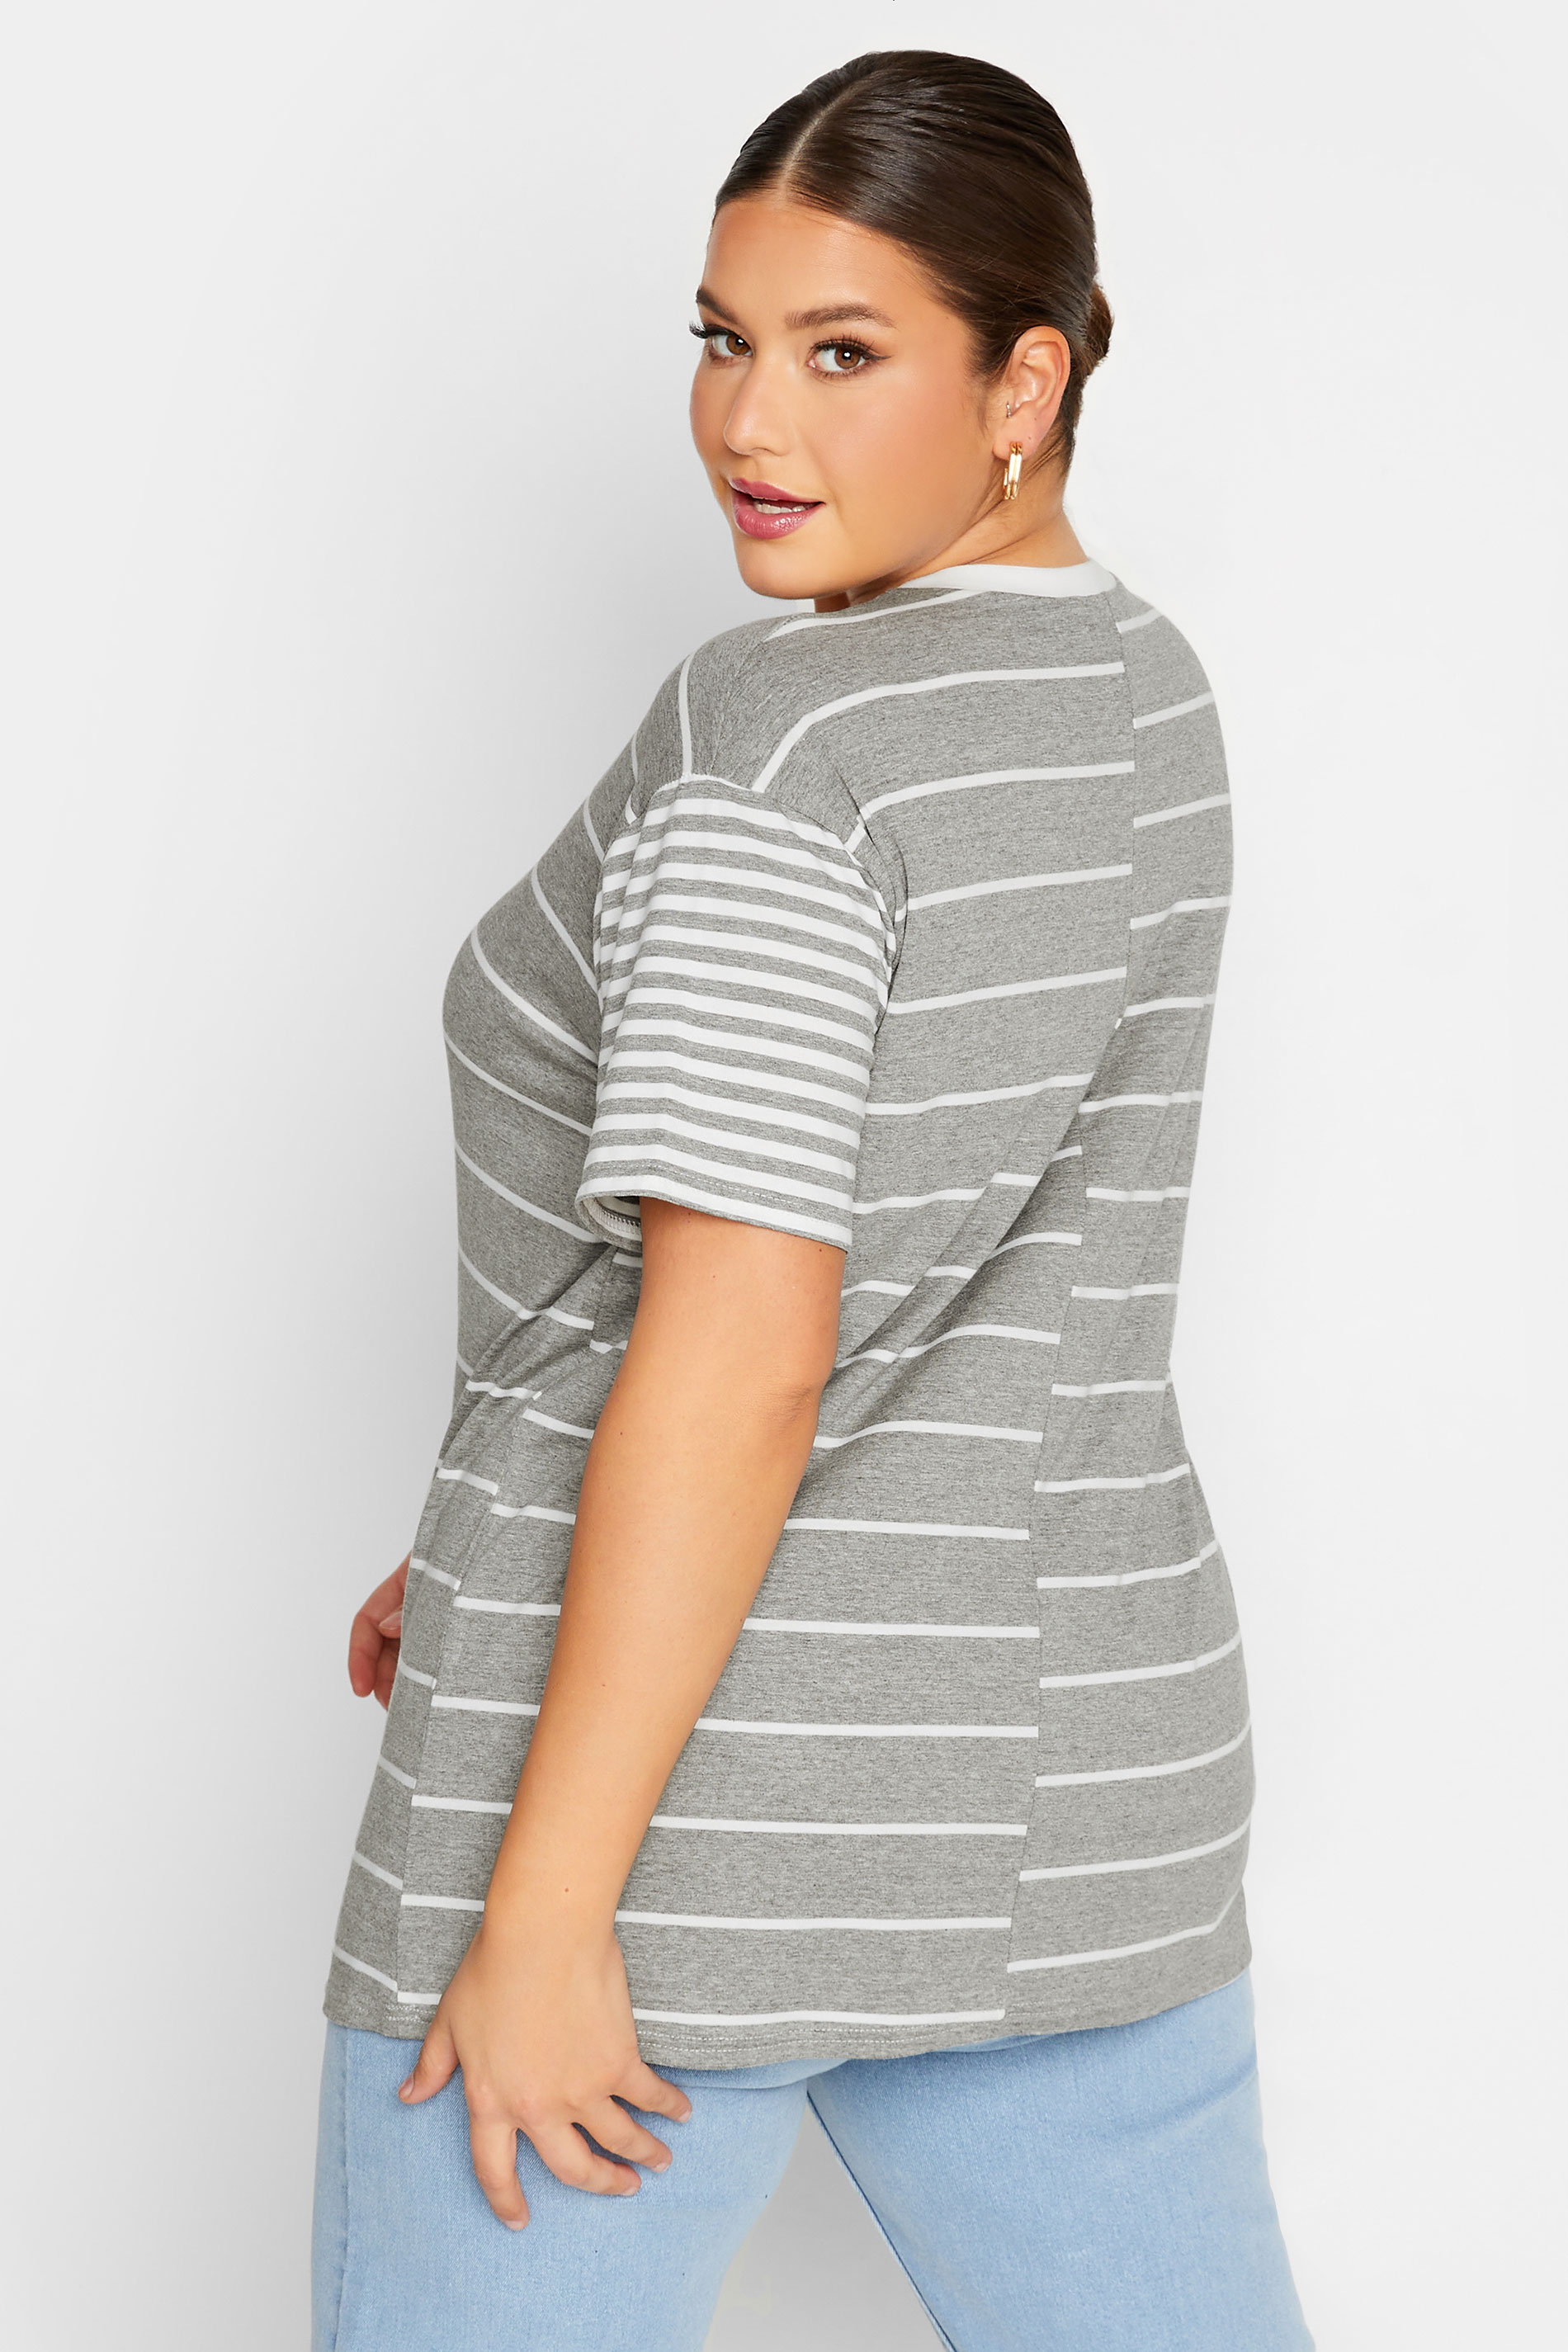 LIMITED COLLECTION Plus Size Grey Mixed Stripe Print T-Shirt | Yours Clothing 3